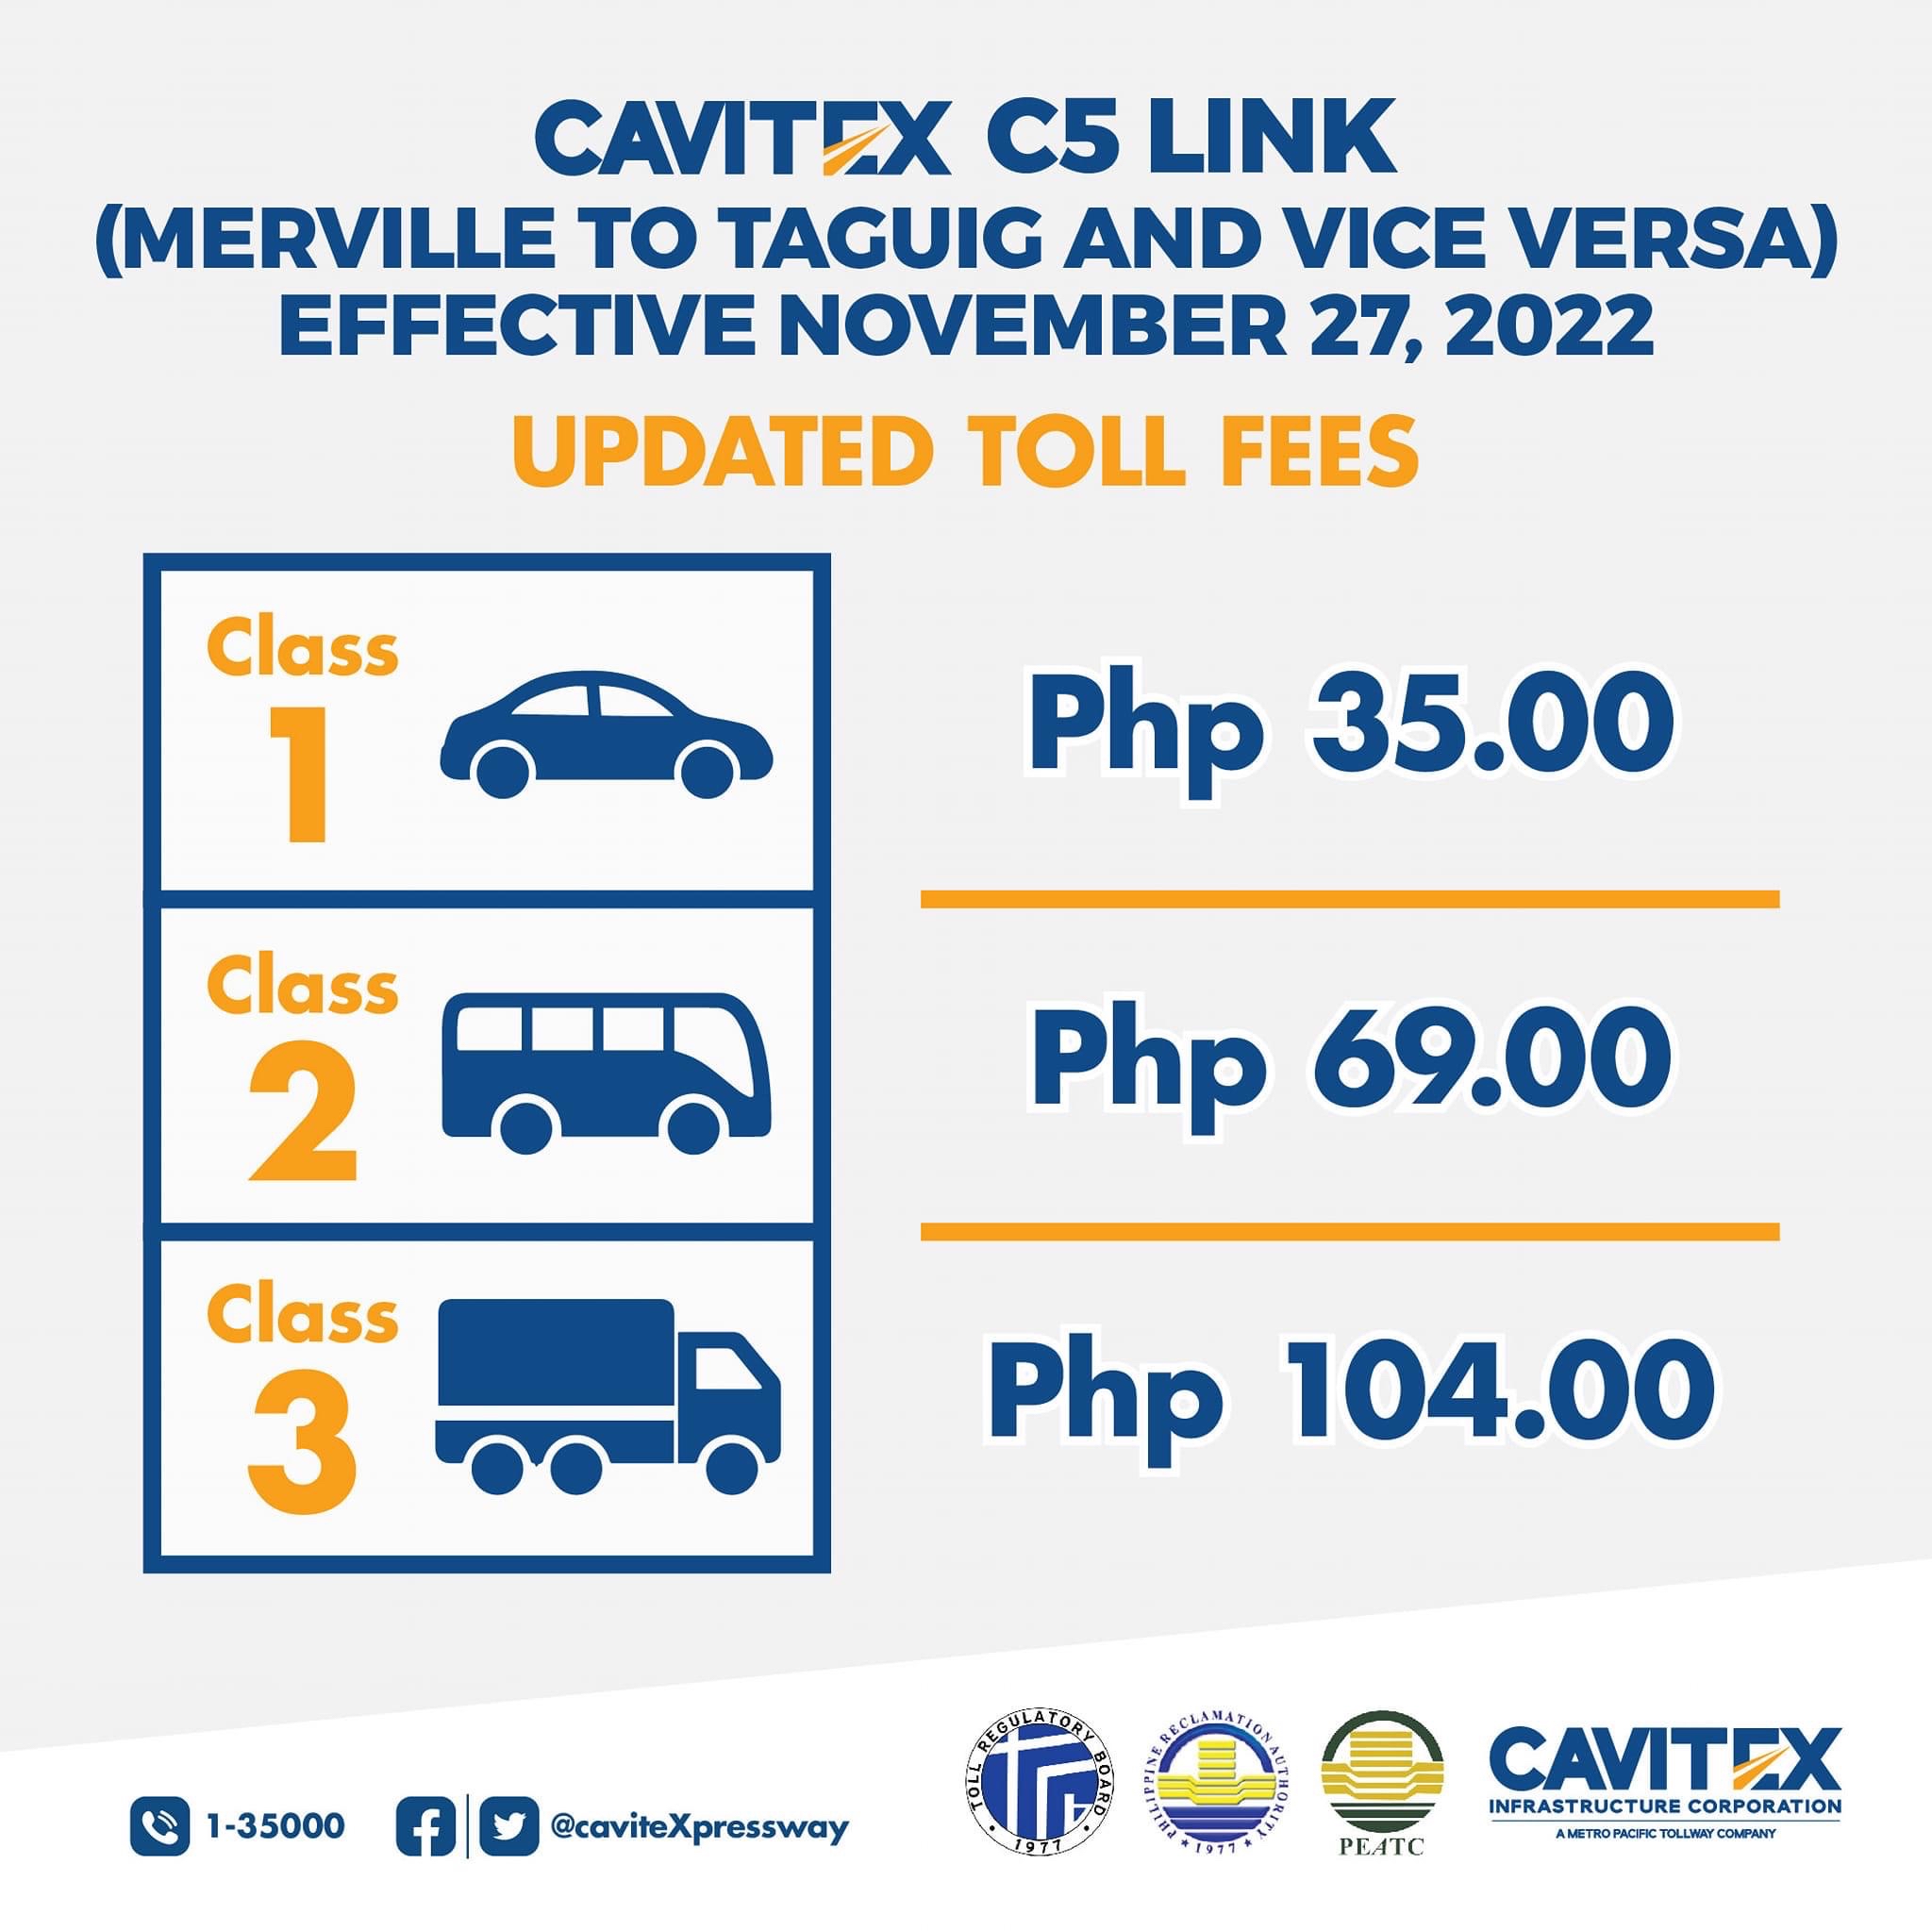 Cavitex C5 Link Updated Toll Fees